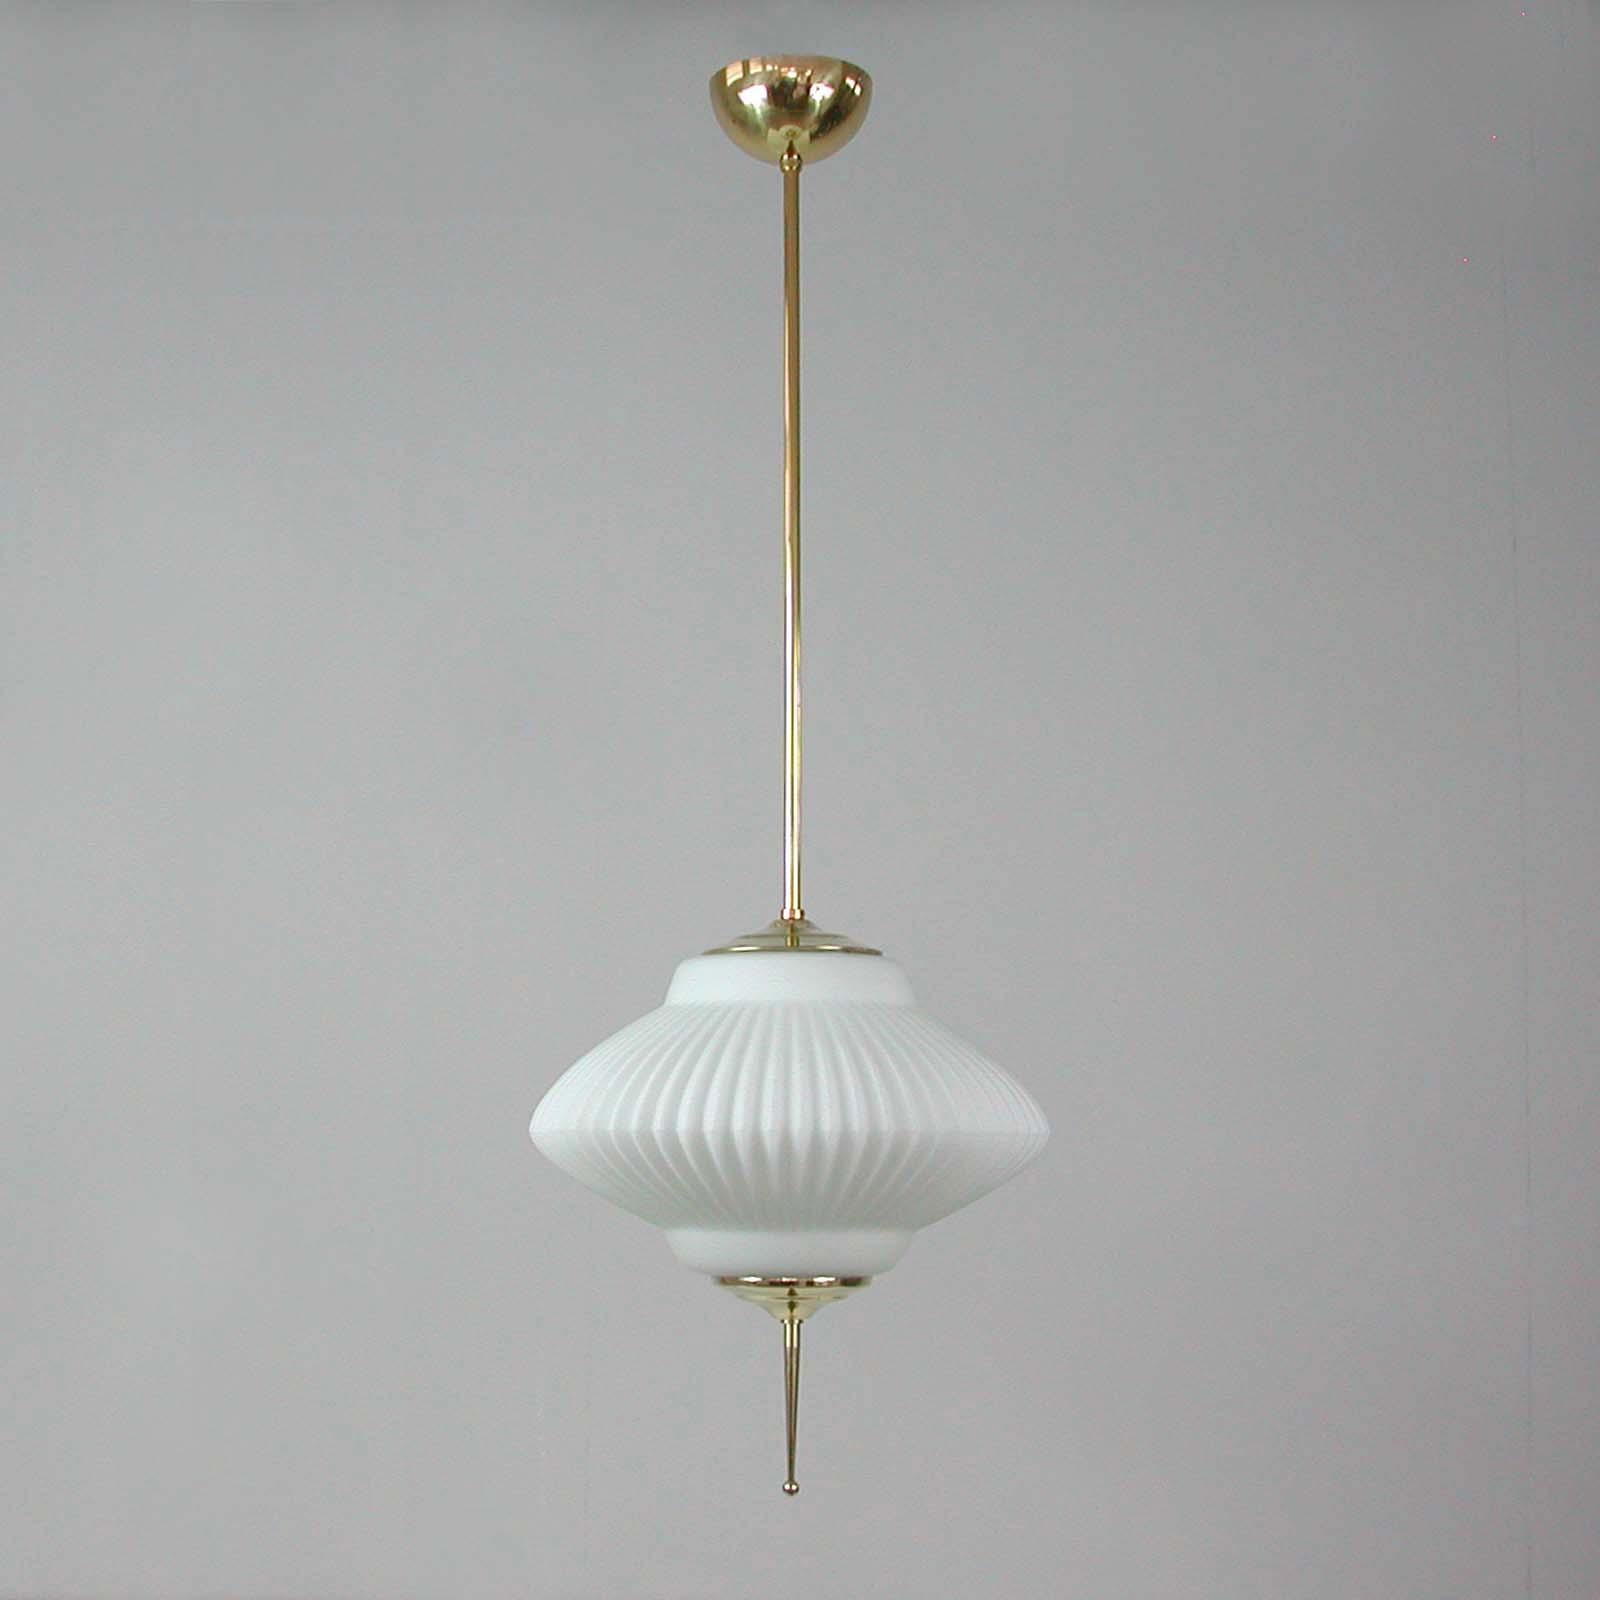 This midcentury lantern was designed and manufactured in Italy in the 1950s to 1960s. It features a ribbed milk glass globe with brass hardware and a brass canopy. 

A simple, elegant and timeless design. 

The lamp has been rewired for use in